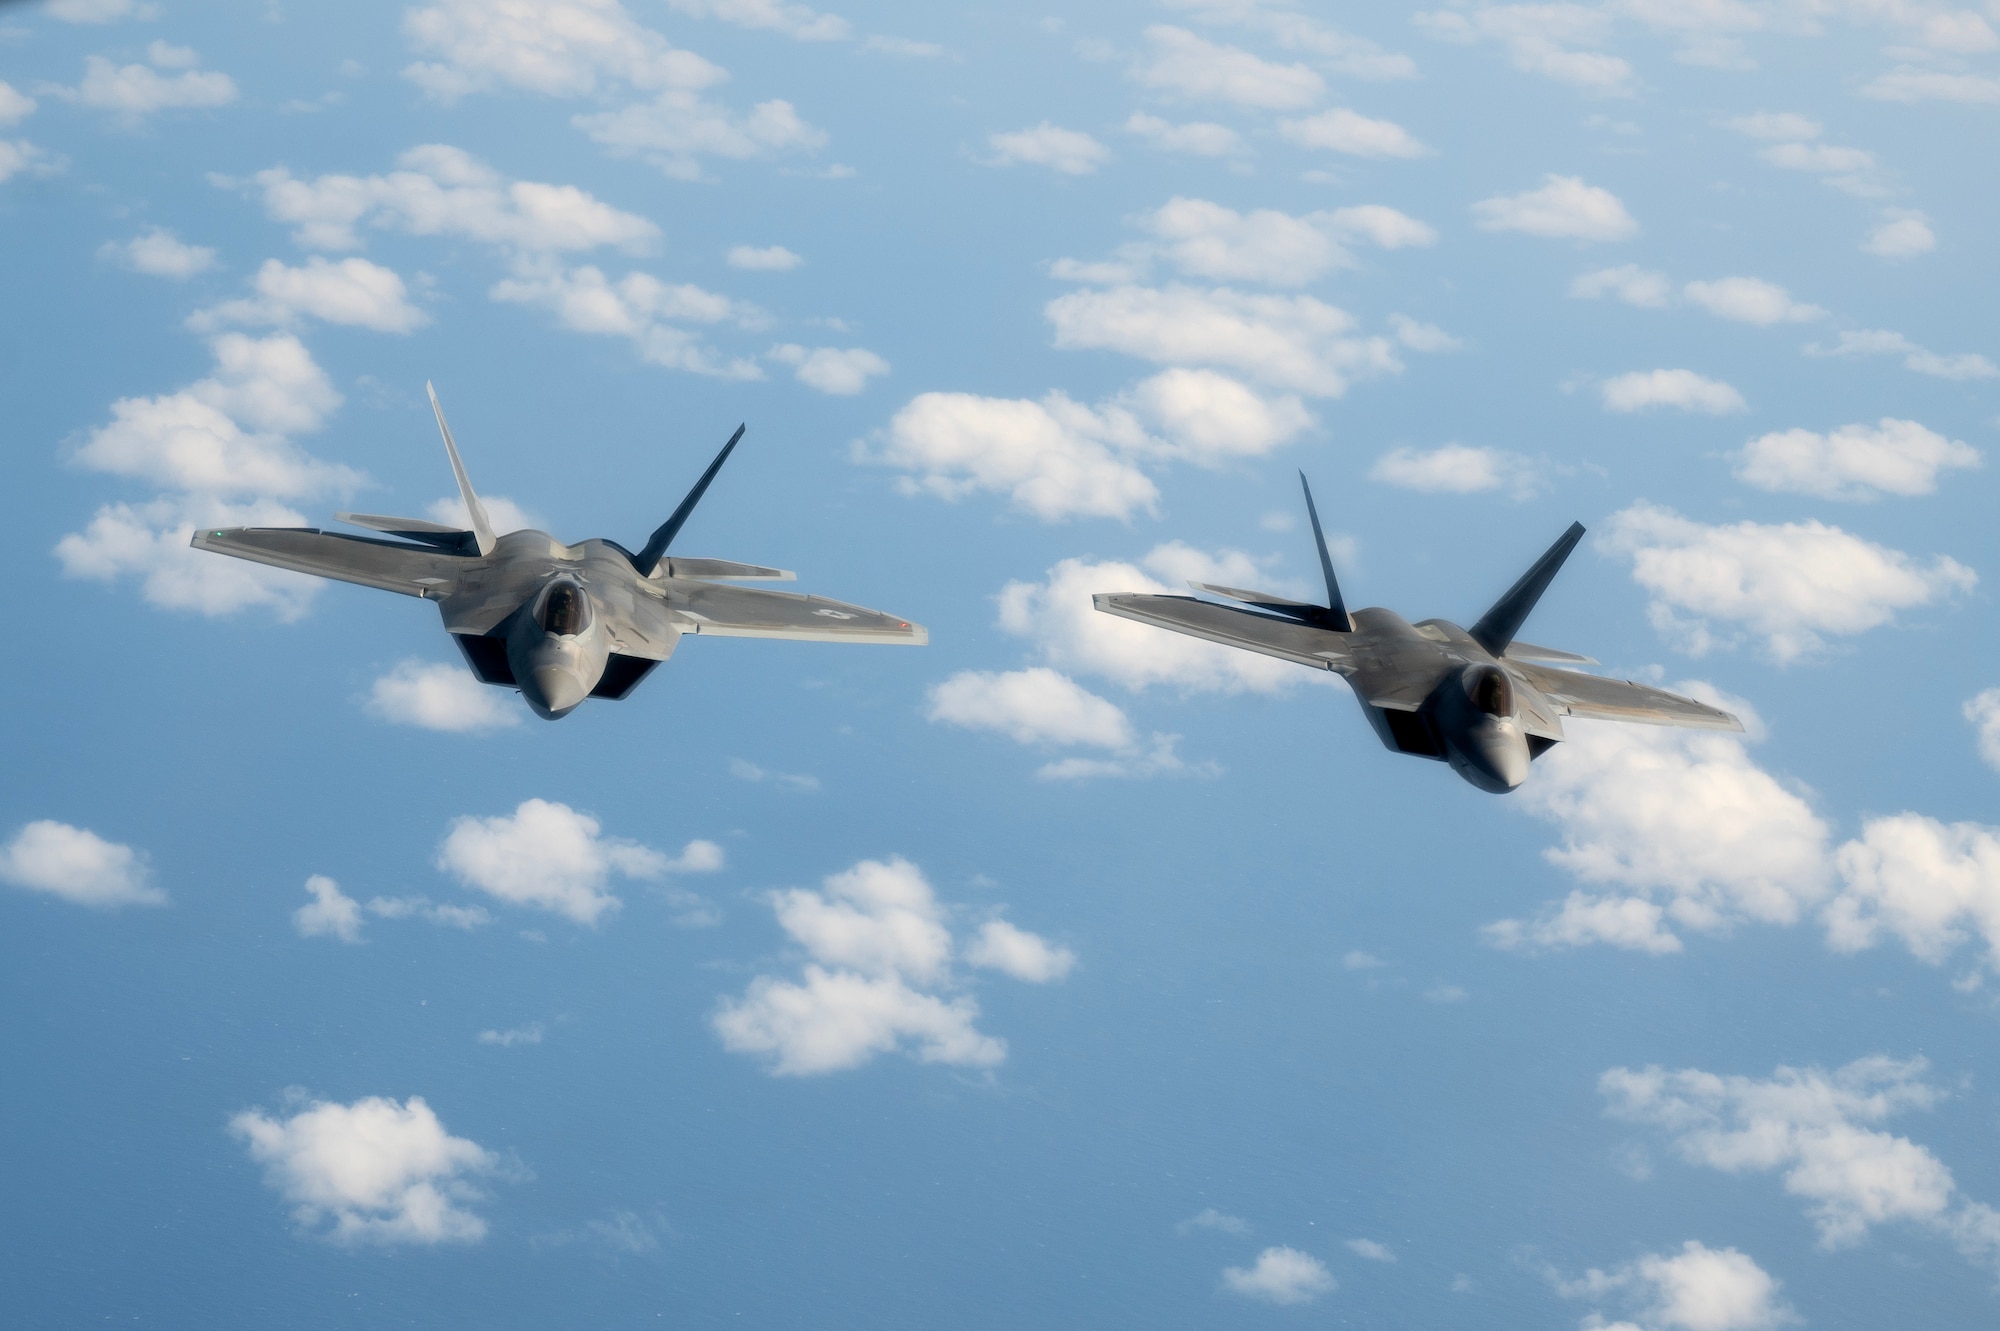 F-22A Raptors assigned to the 525th Fighter Squadron fly behind a KC-135 Stratotanker over the South China Sea, March 13, 2023. The Raptors flew to Clark Air Base, Philippines, where they integrated with FA-50PH pilots from the Philippine Air Force’s 5th Fighter Wing to exchange expertise and engage in aerial training. (U.S. Air Force photo by Senior Airman Jessi Roth)